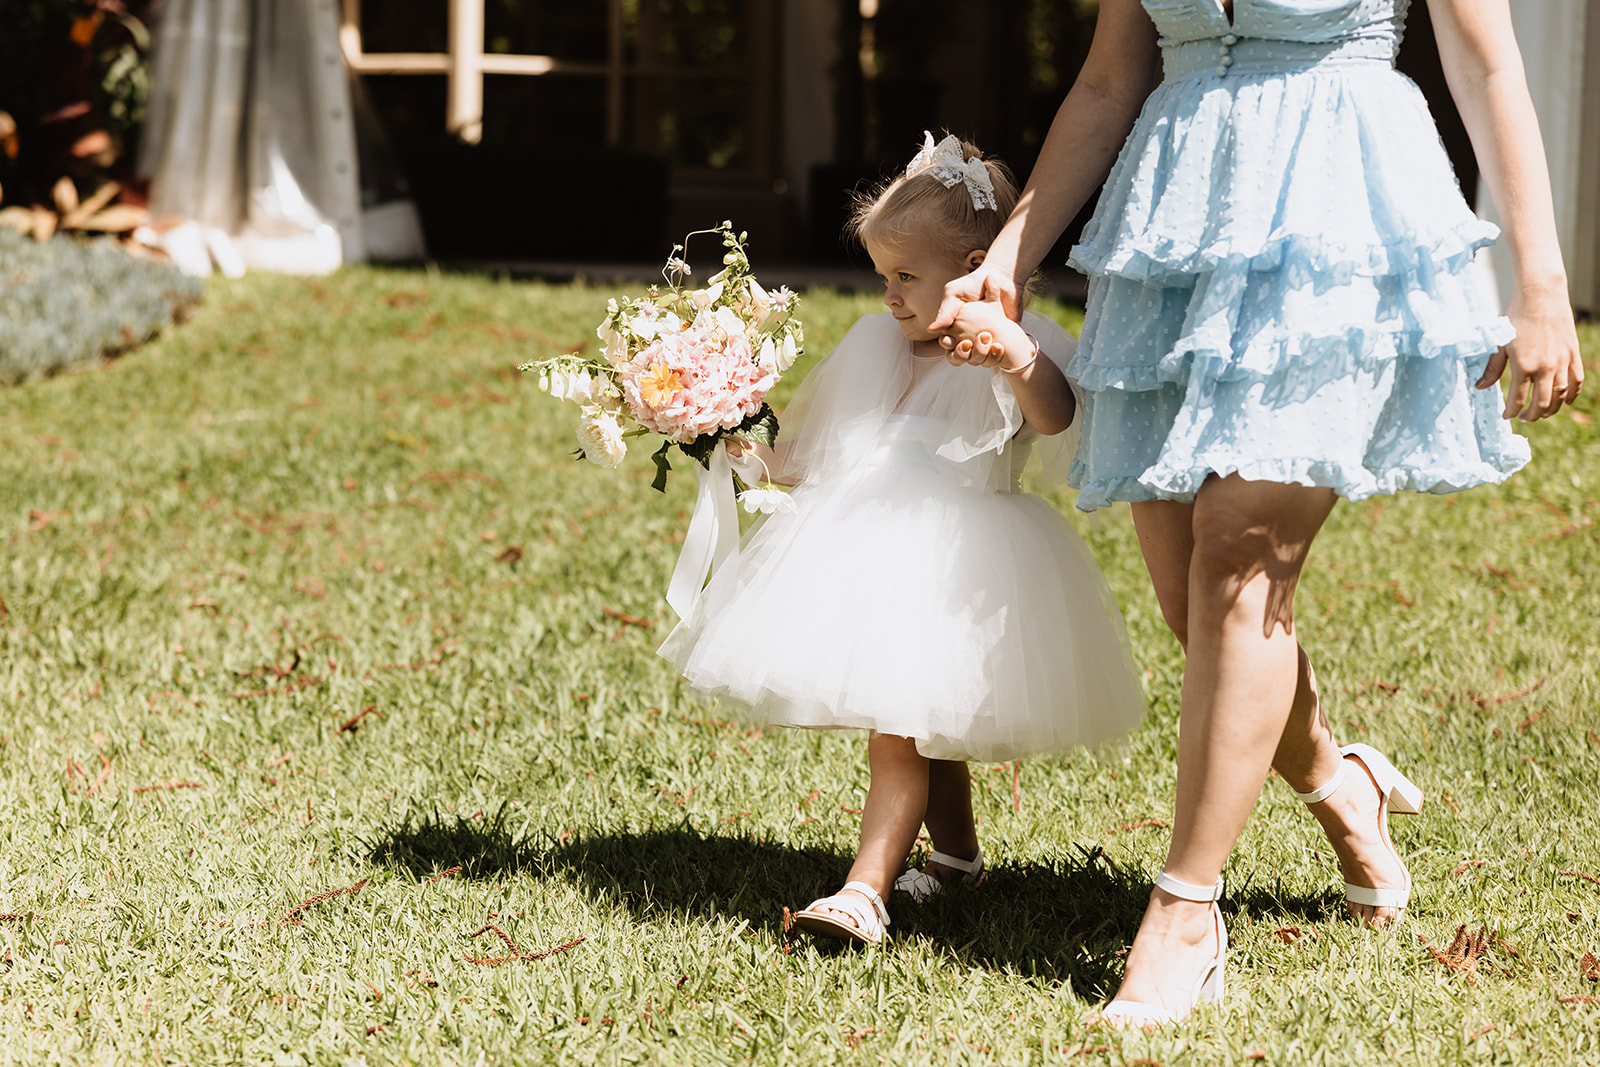 Flower girl walking down the aisle at the Wedding in Lindesay House, Darling Point New South Wales